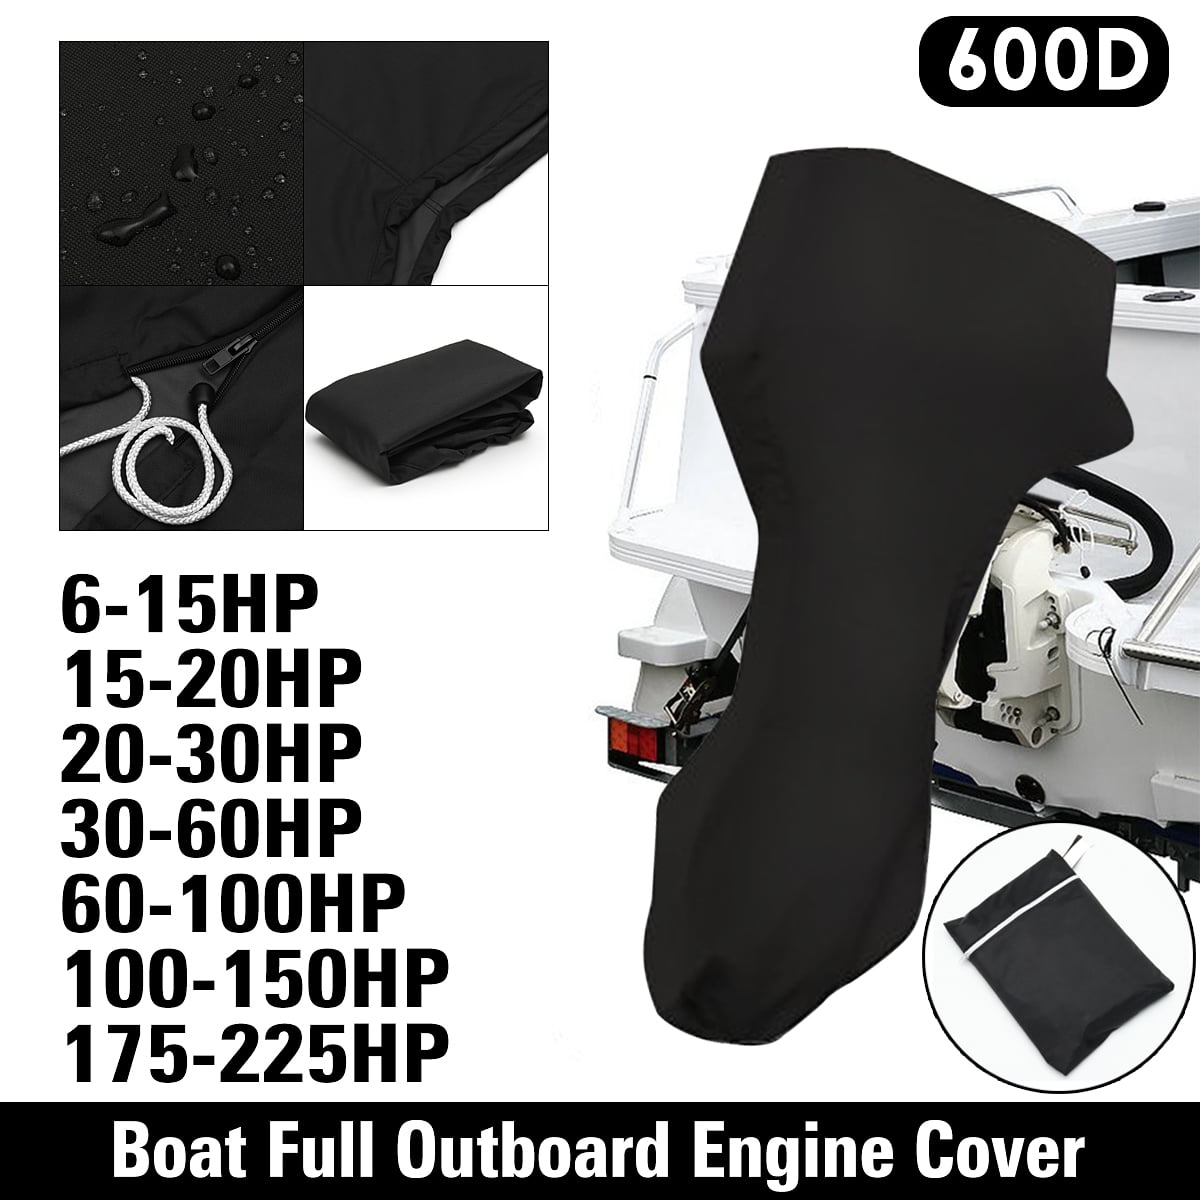 Speedboat Full Outboard Engine Motor Cover body Fit Up to 6-225HP 600D Black UK 